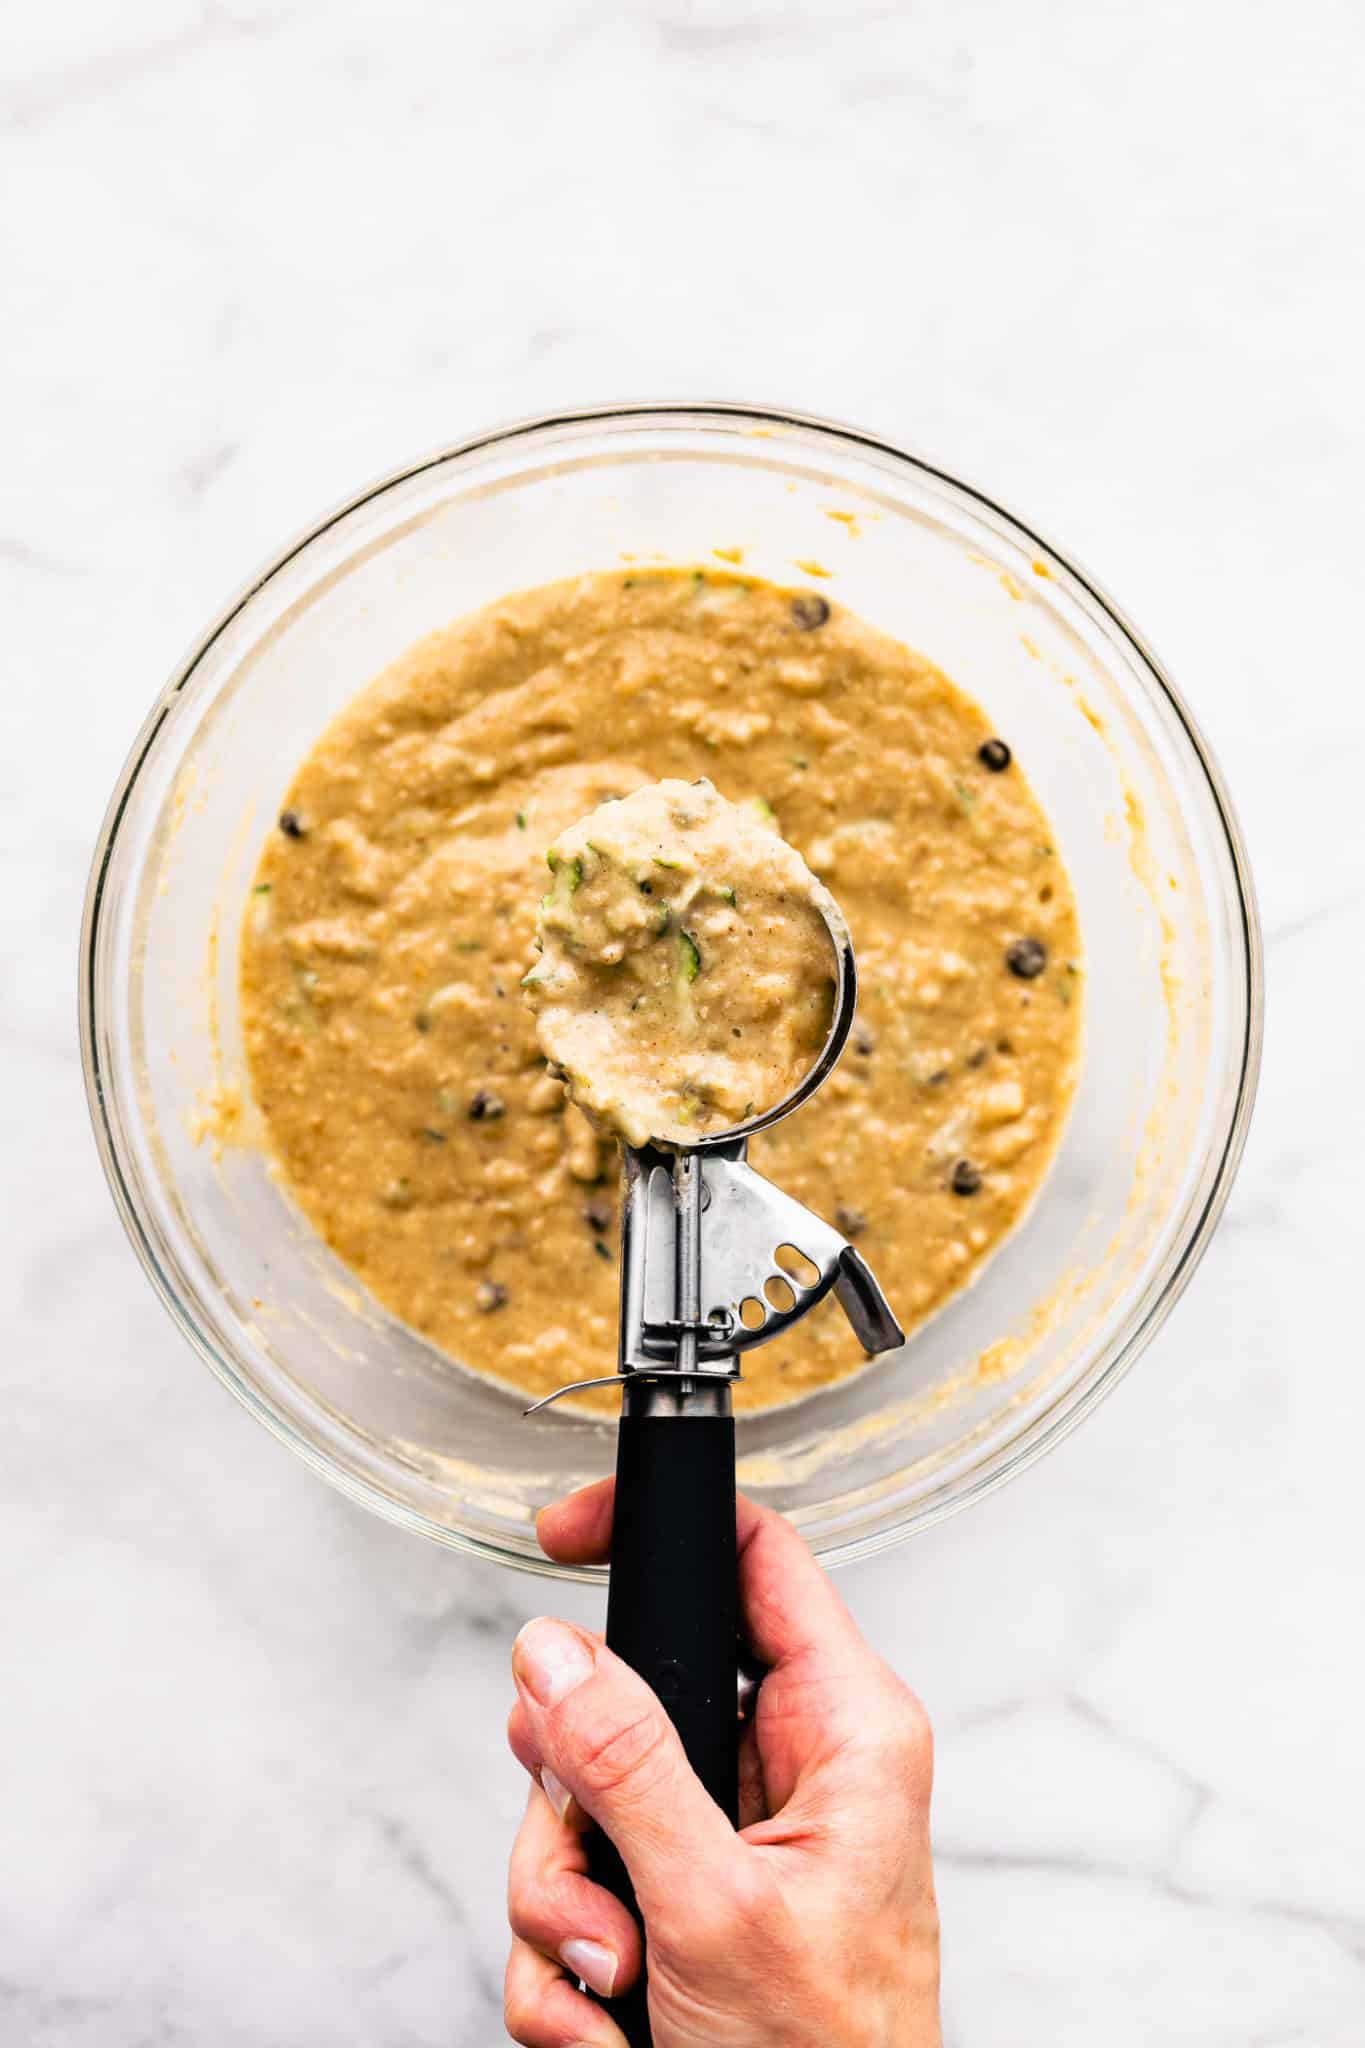 a woman's hand holding a cookie scoop full of batter over a glass bowl of gluten free zucchini muffin batter